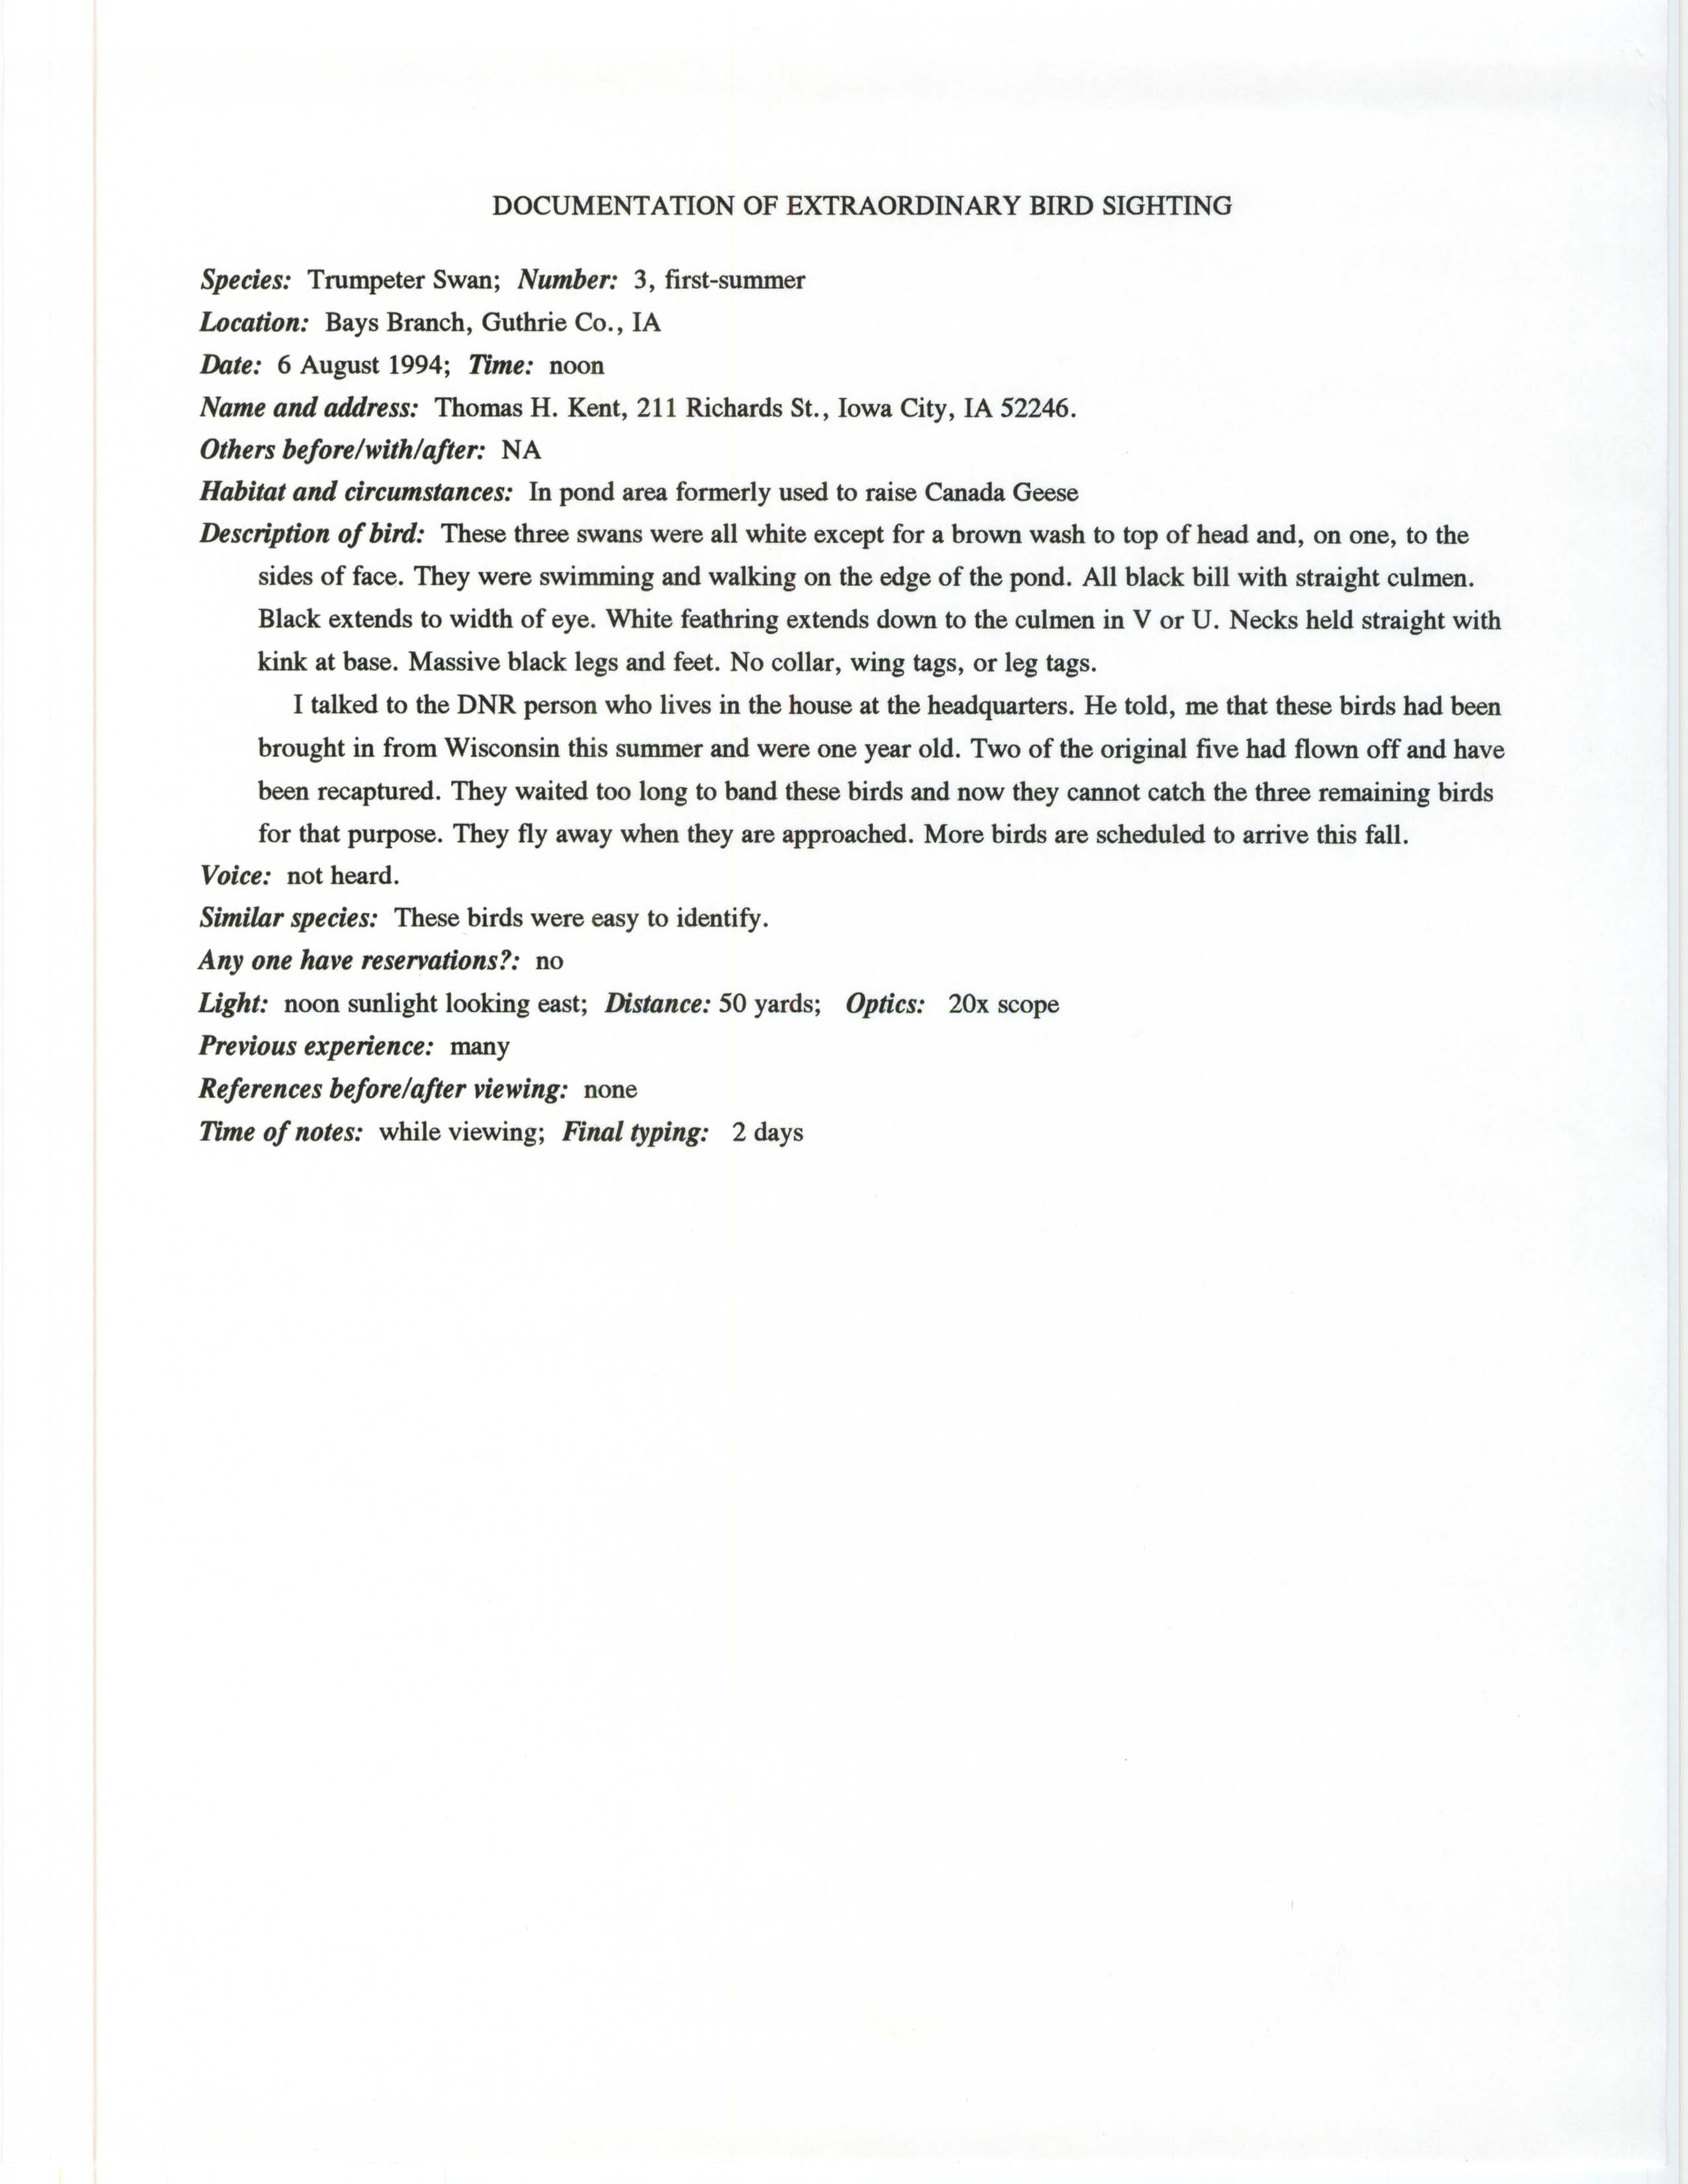 Rare bird documentation form for Trumpeter Swan at Bays Branch, 1994